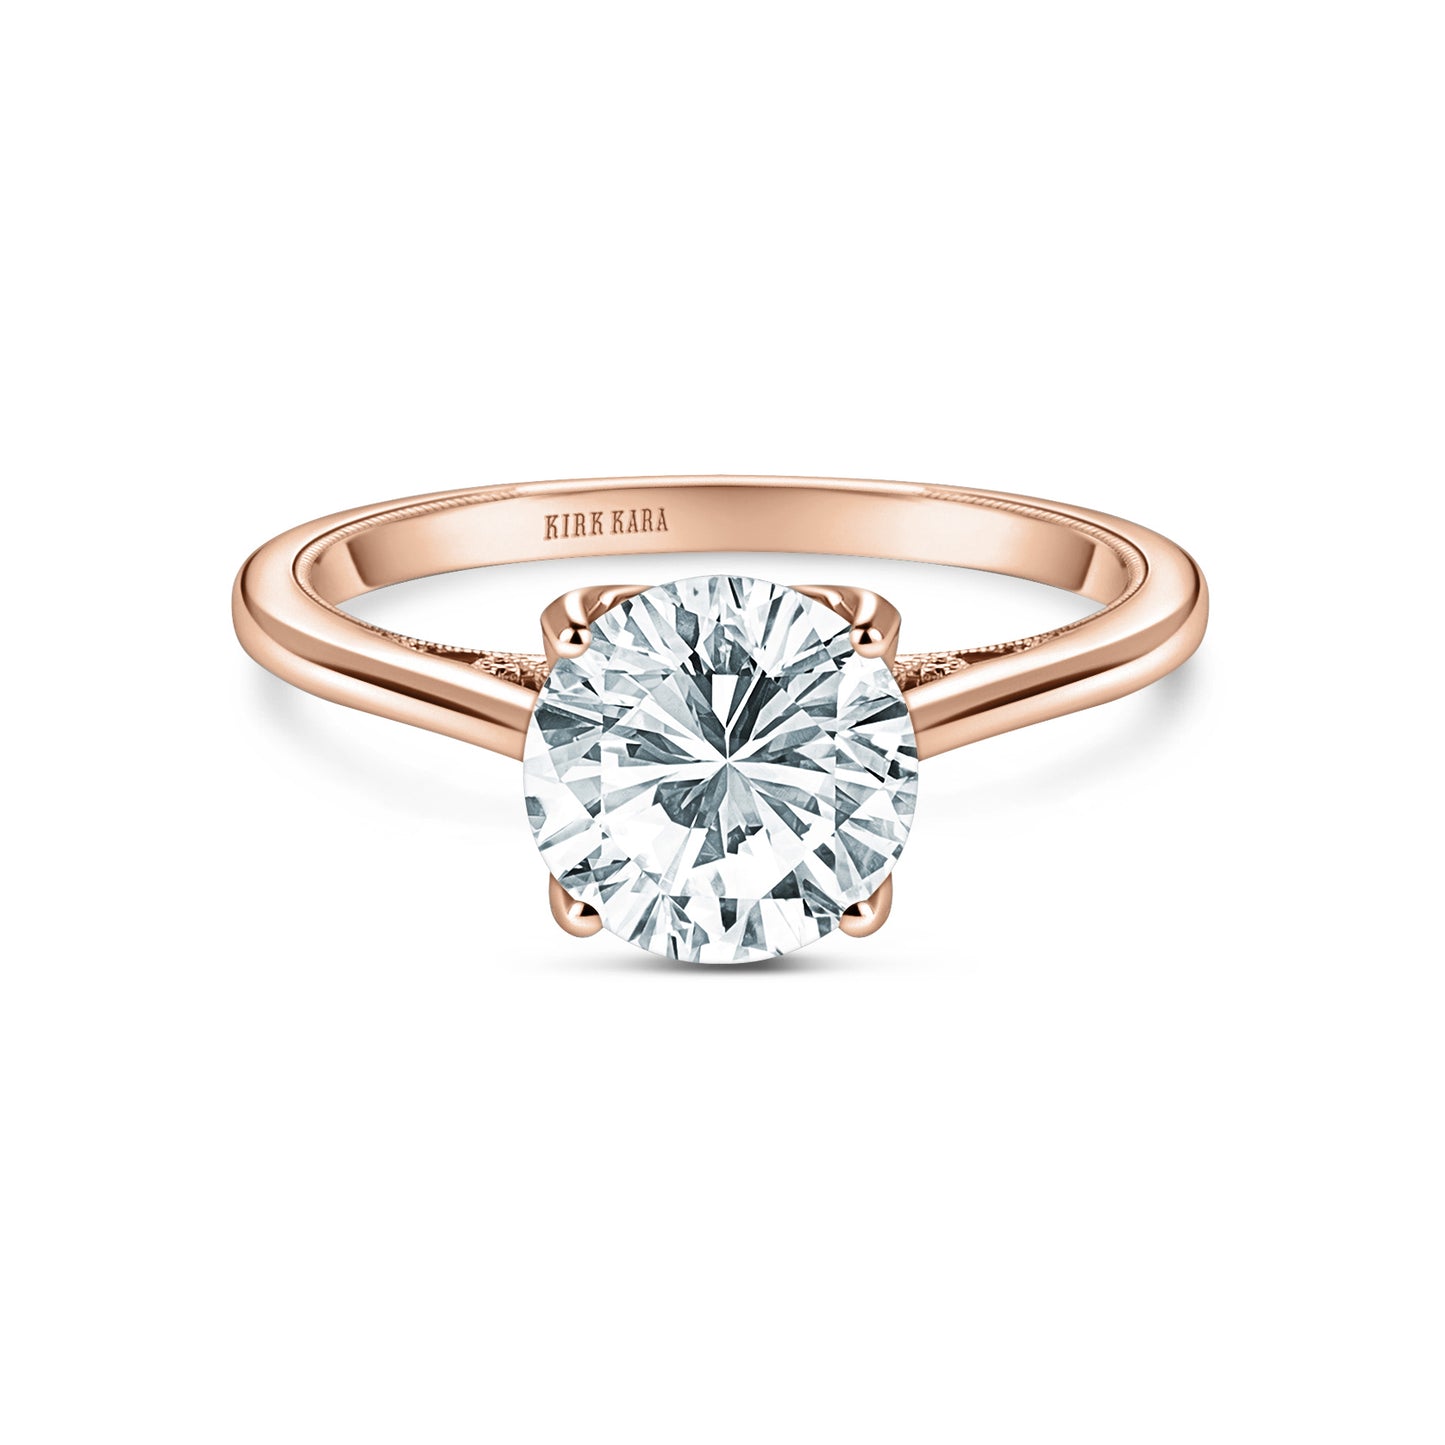 Cathedral Filigree Hidden Halo Solitaire Engagement Ring